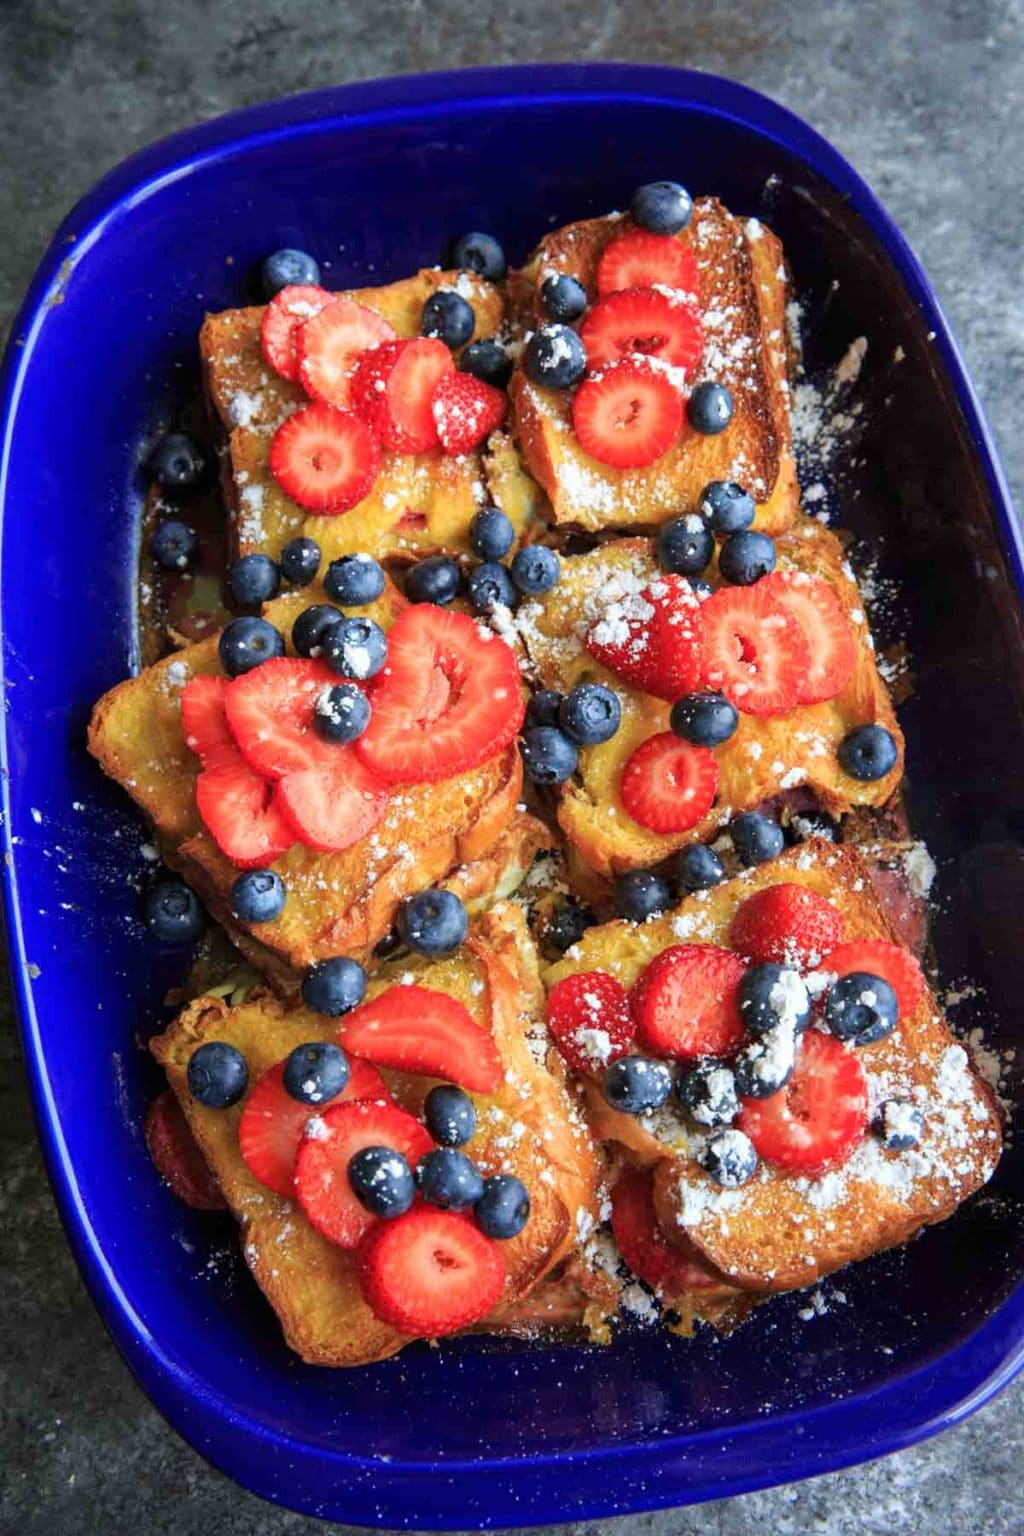 blue casserole dish filled with stuffed french toast, topped with blueberries, strawberries and powdered sugar